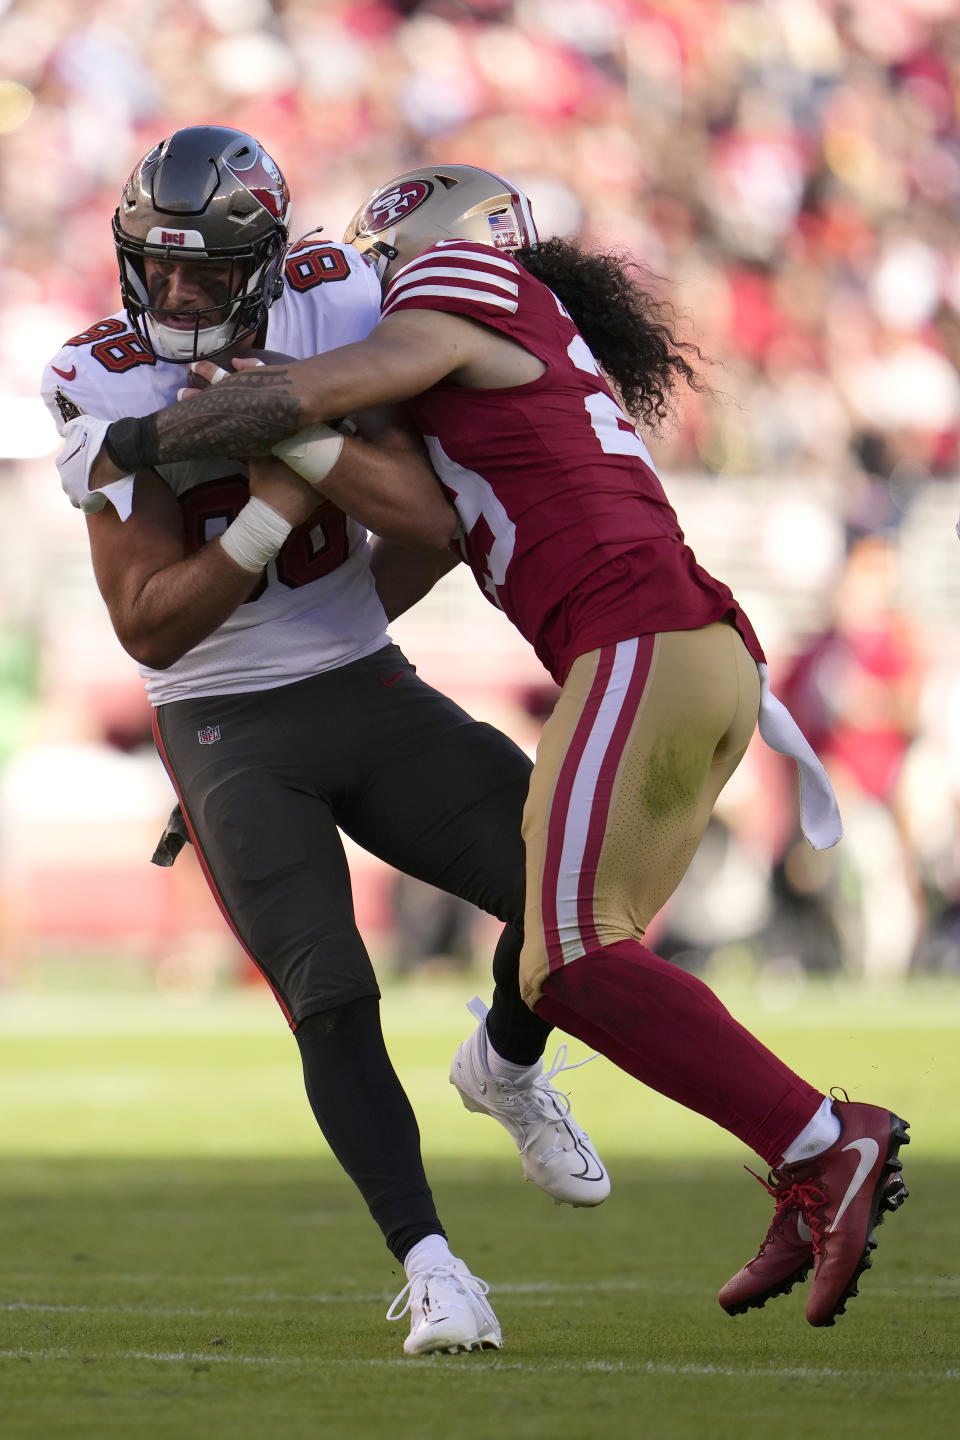 Tampa Bay Buccaneers tight end Cade Otton (88) is tackled by San Francisco 49ers safety Talanoa Hufanga during the first half of an NFL football game in Santa Clara, Calif., Sunday, Nov. 19, 2023. (AP Photo/Godofredo A. Vásquez)